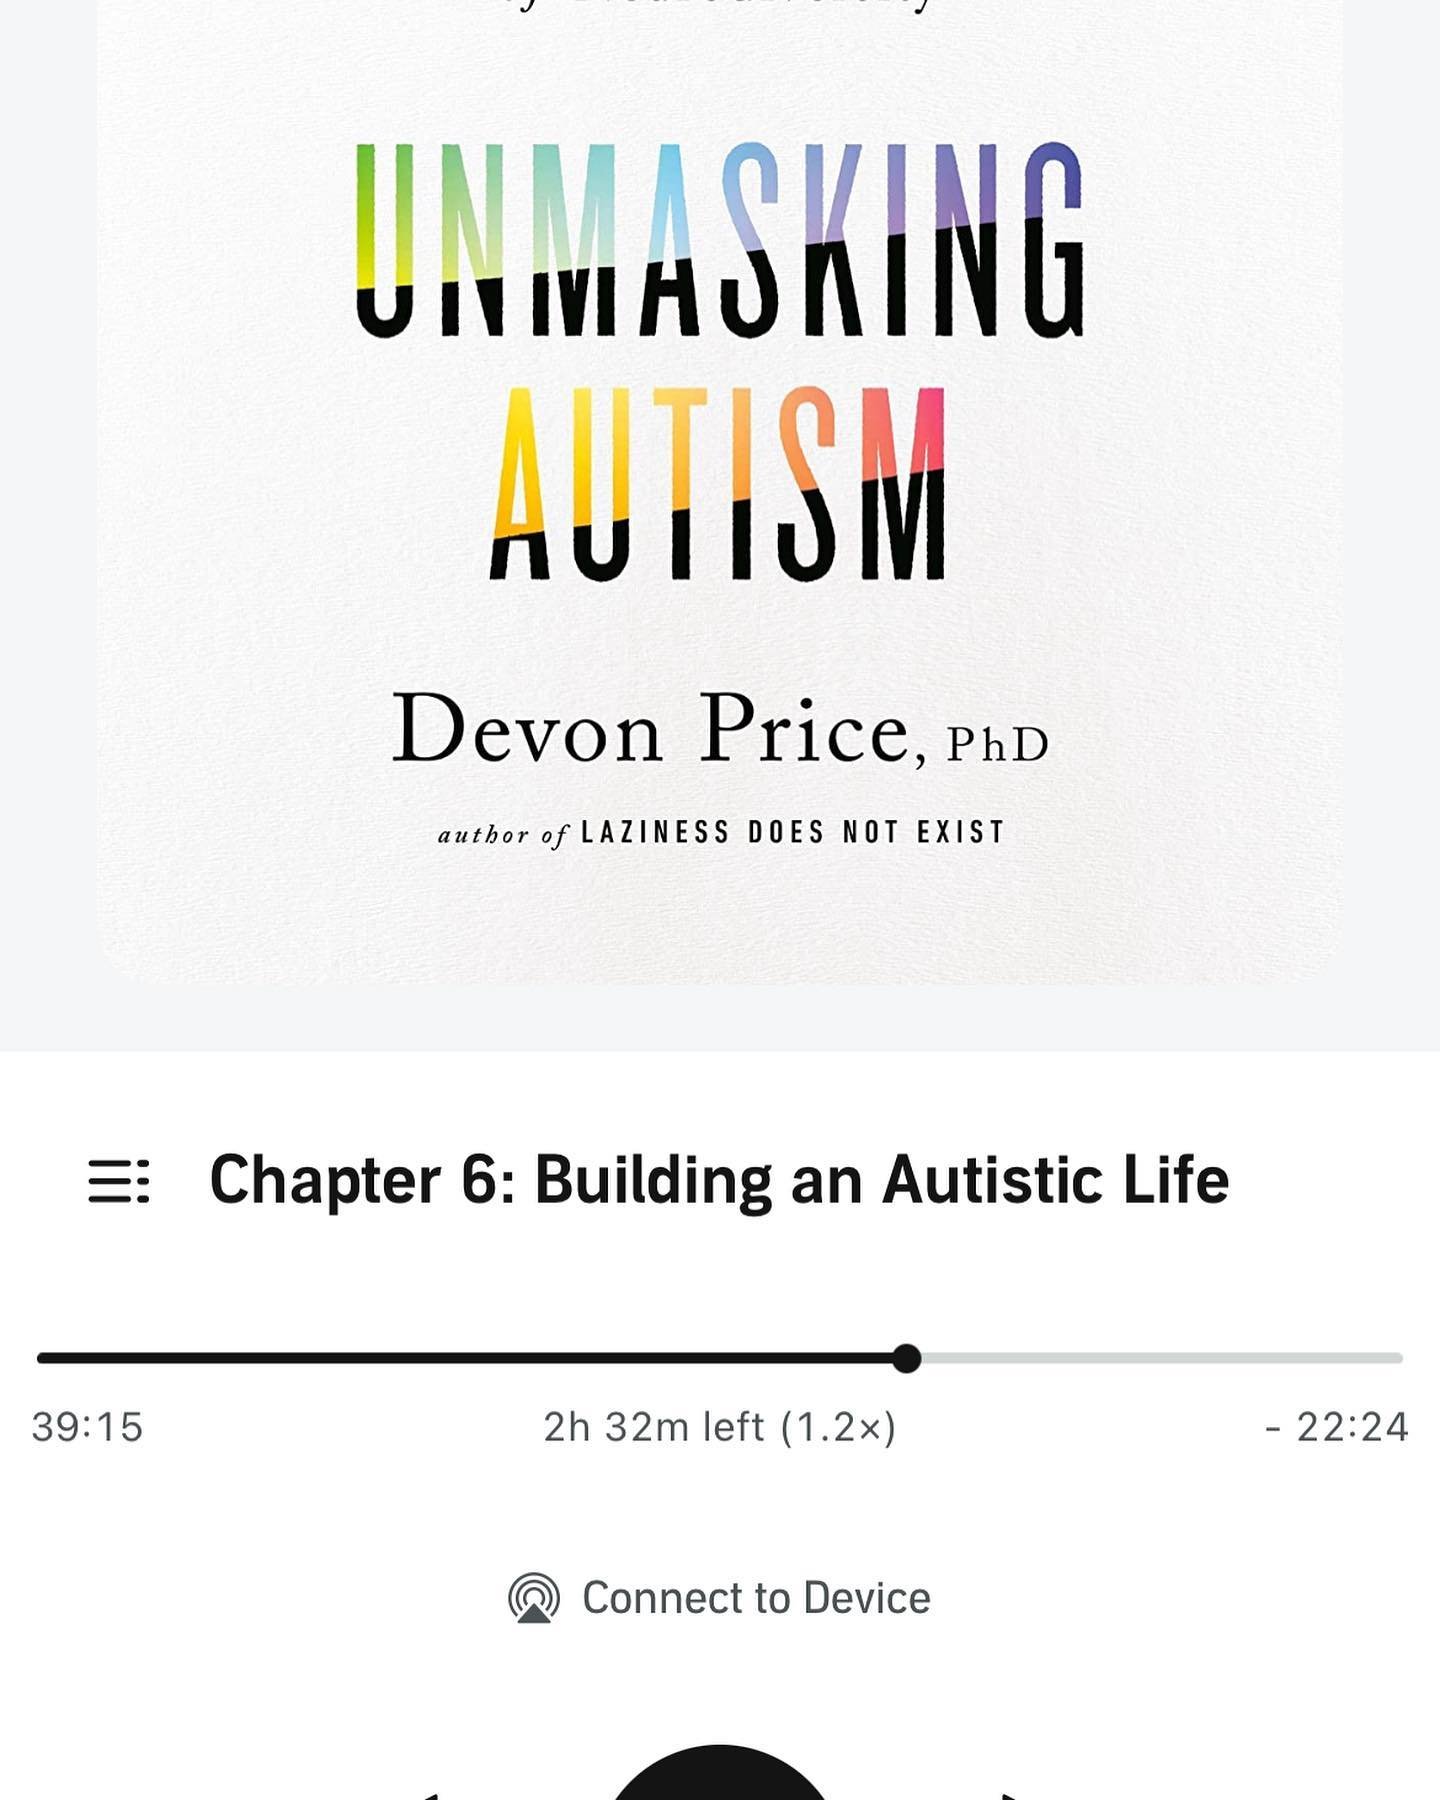 Great book! Lots of good info about adult autism.